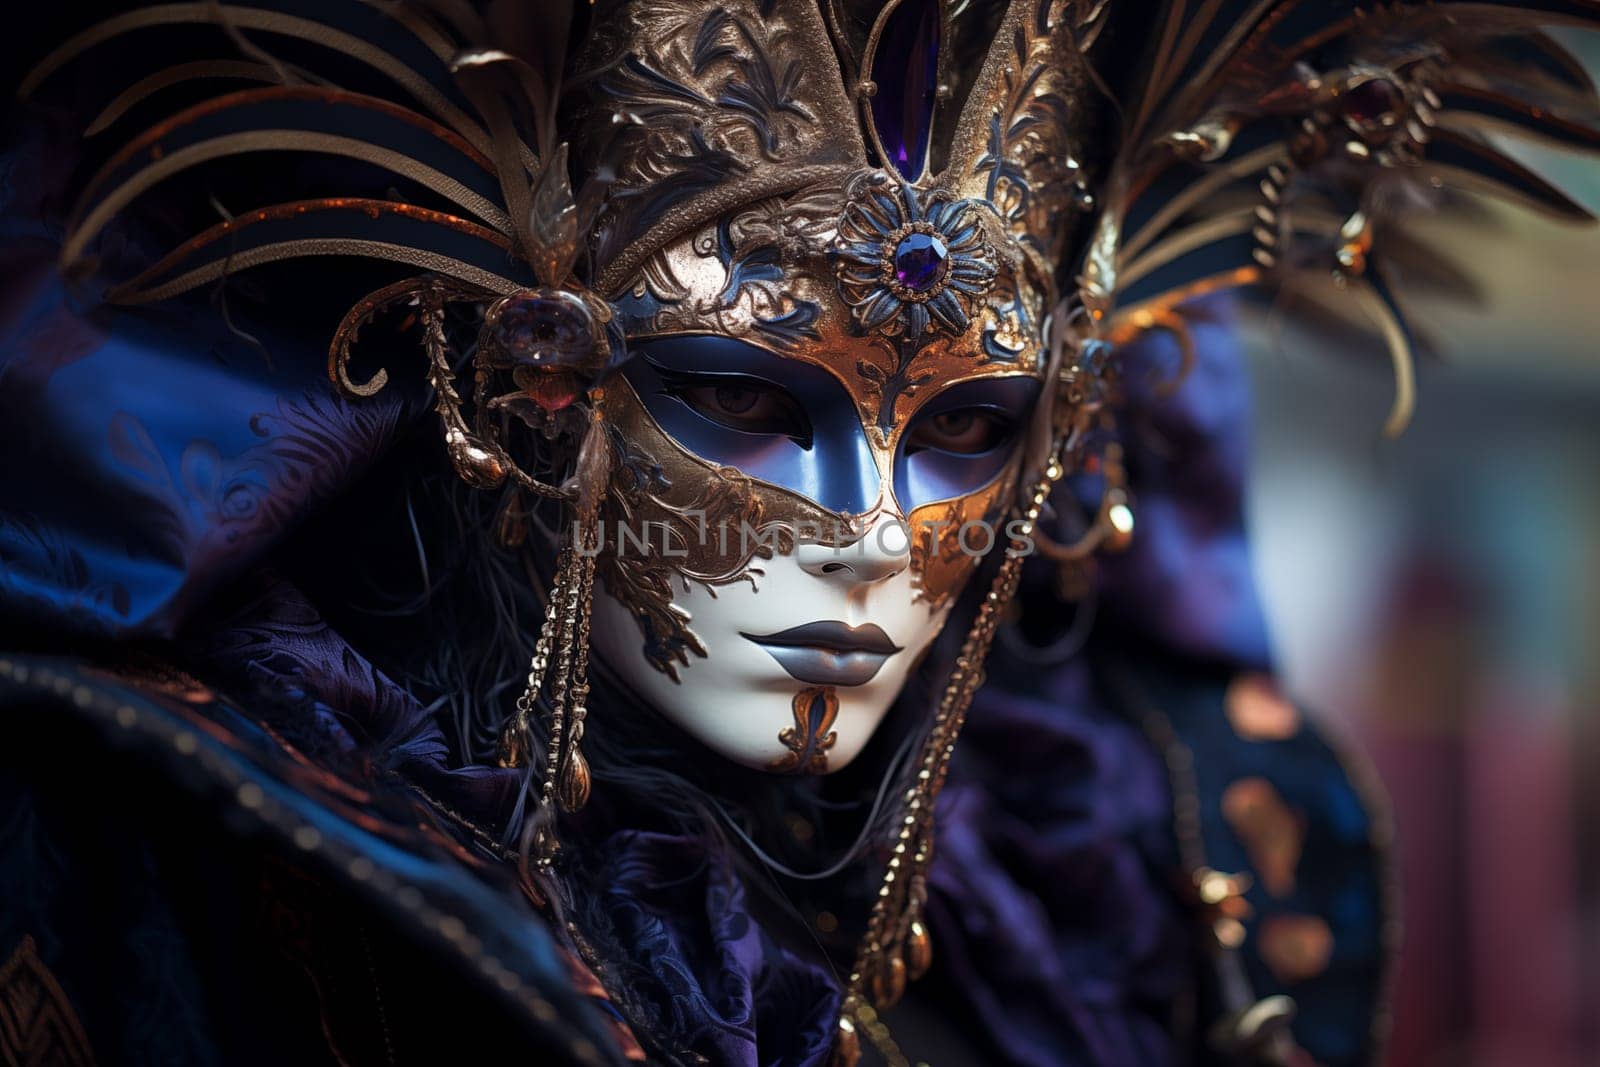 Elegant Person in Vibrant Carnival Costume and Mask at Venice Festival by dimol